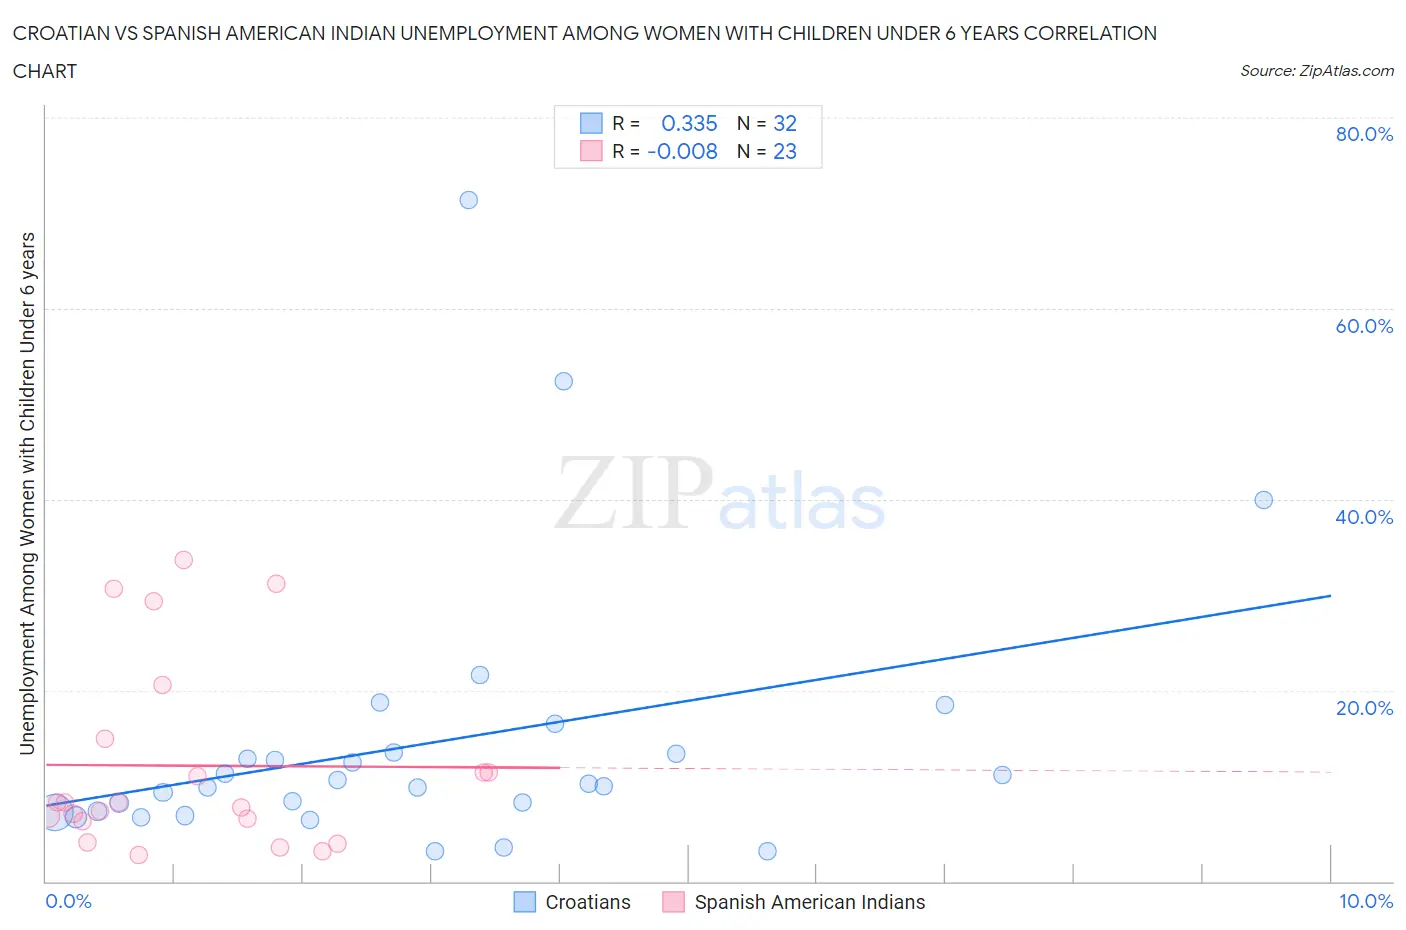 Croatian vs Spanish American Indian Unemployment Among Women with Children Under 6 years